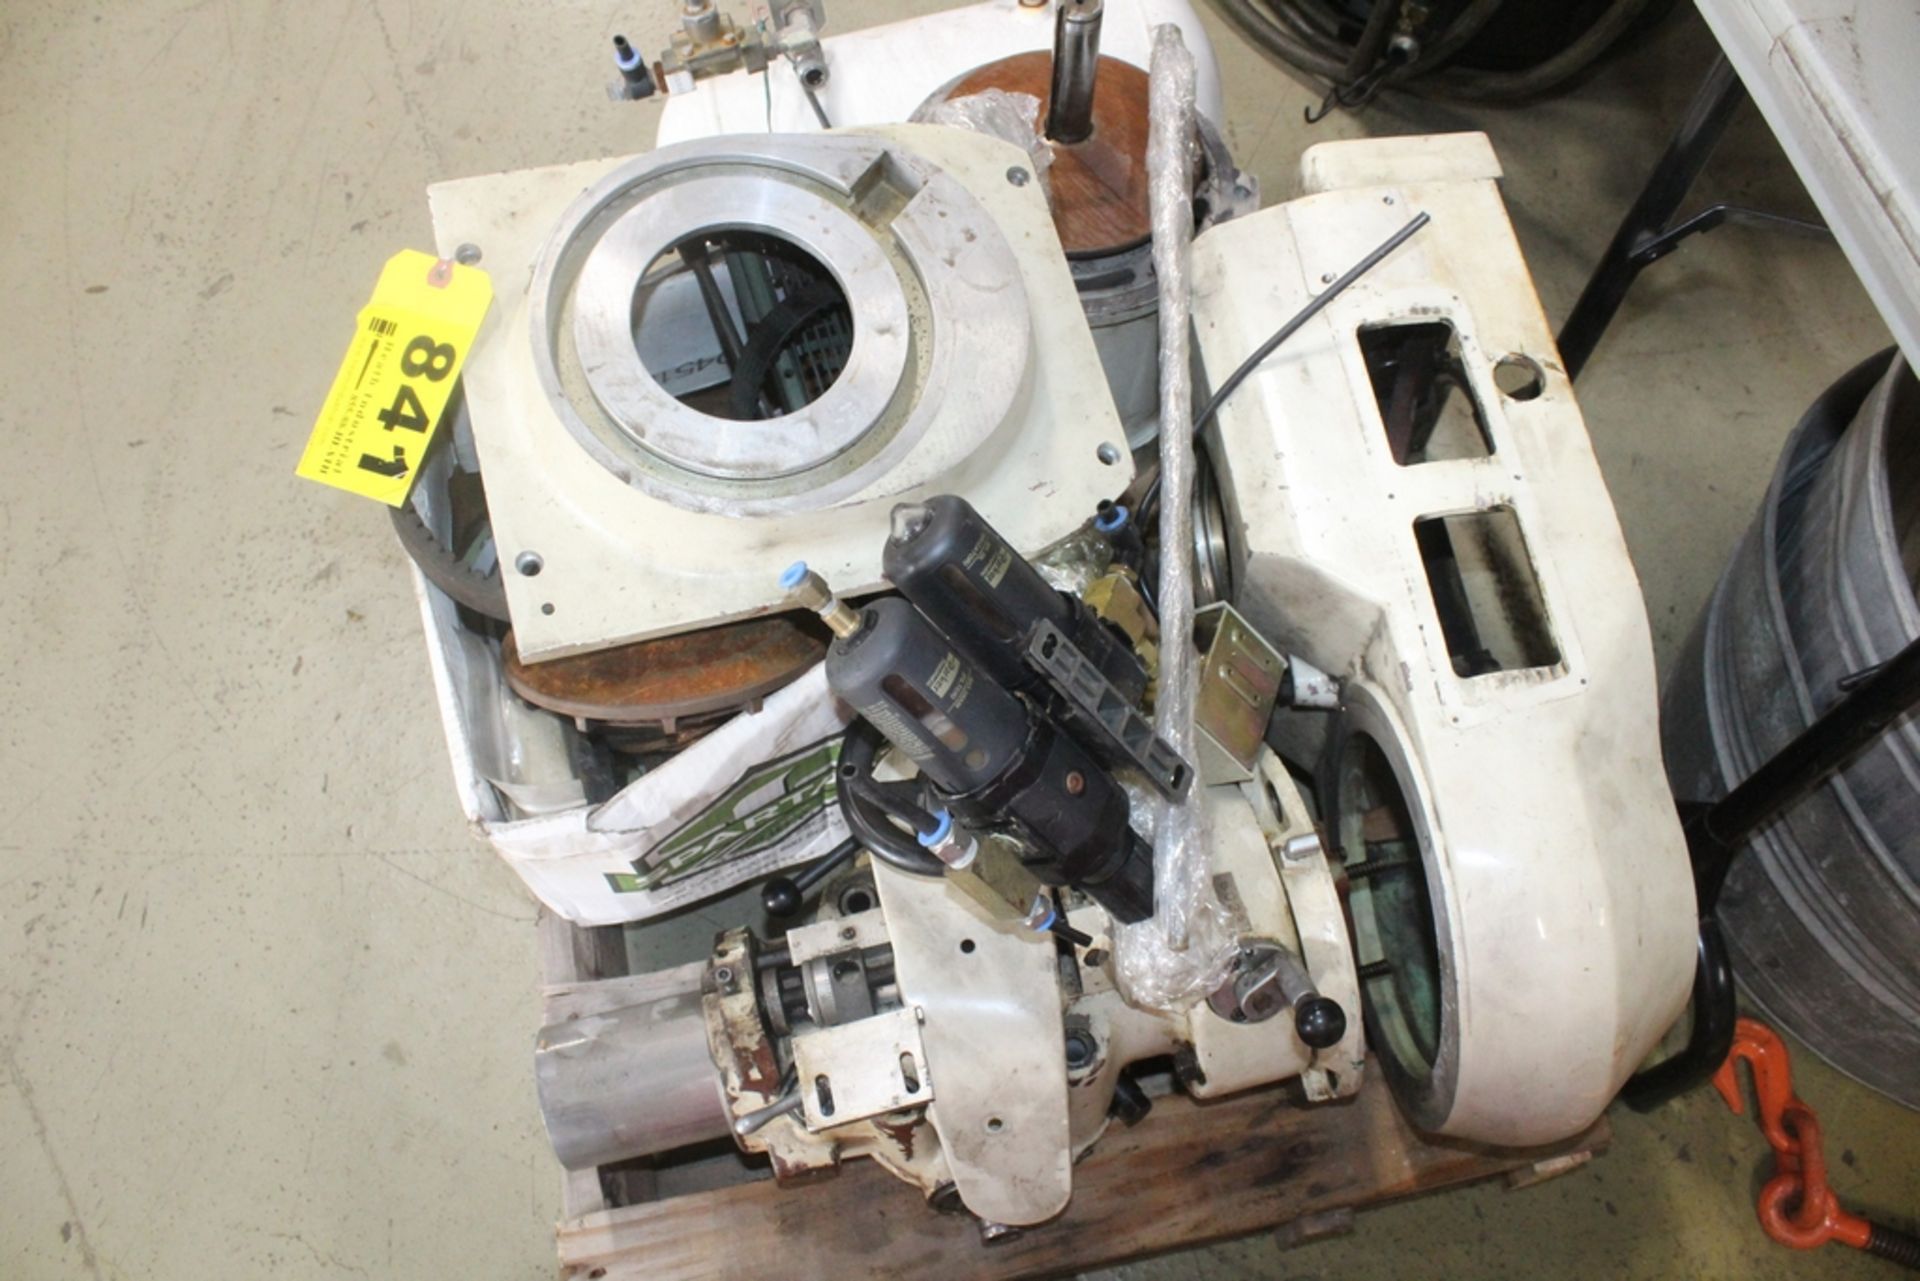 DISASSEMBLED MILLING MACHINE HEAD ON SKID - Image 2 of 3